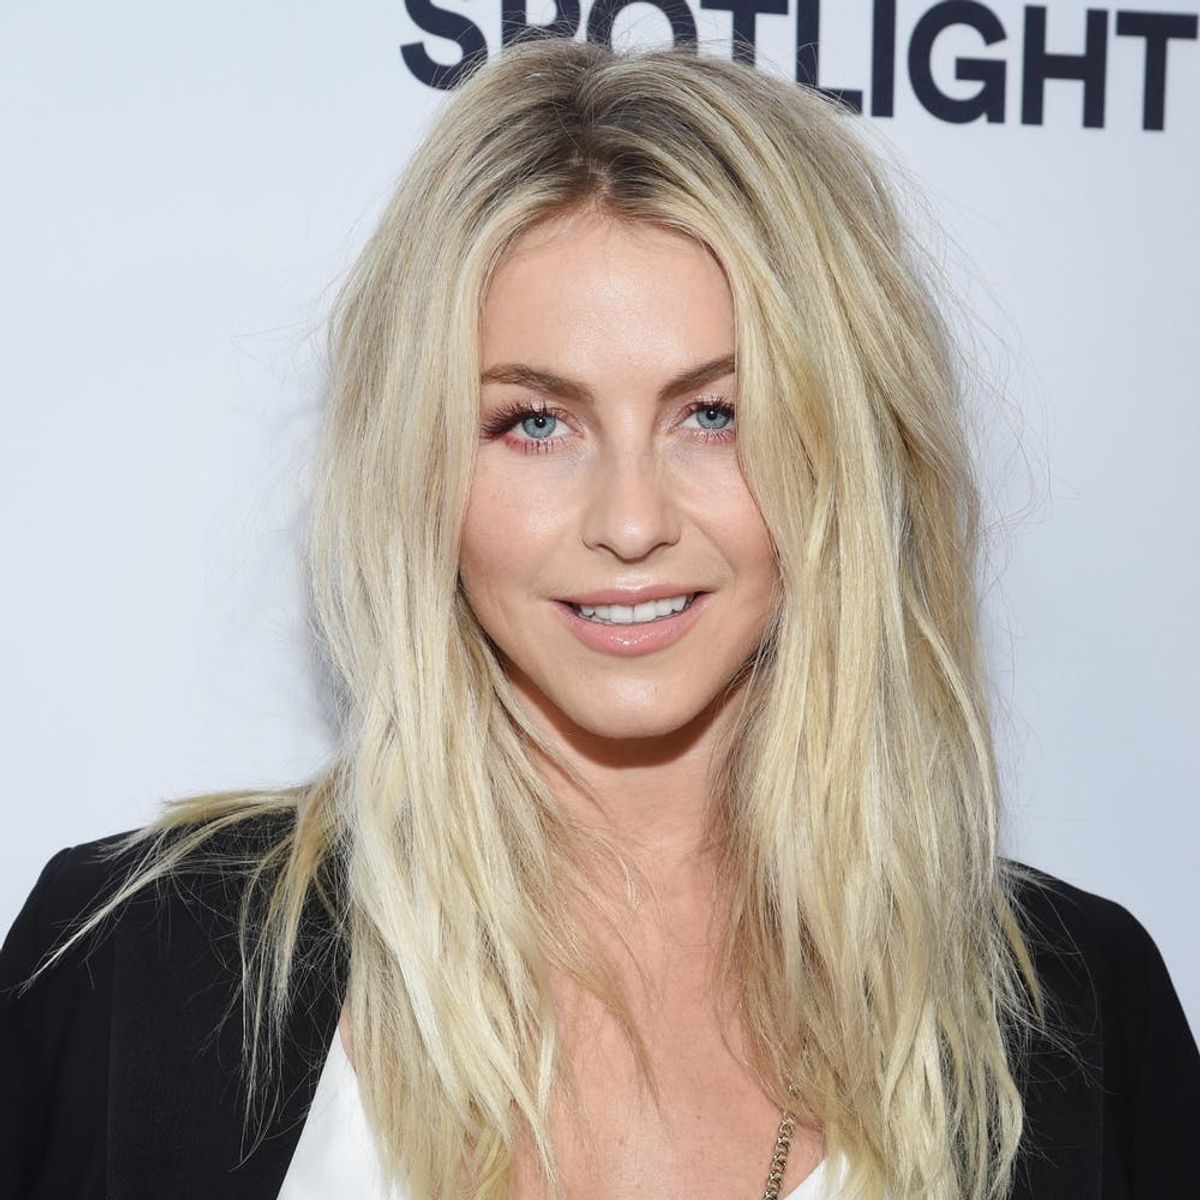 Julianne Hough Found the Perfect One-Piece Suit for Her Pre-Wedding Party